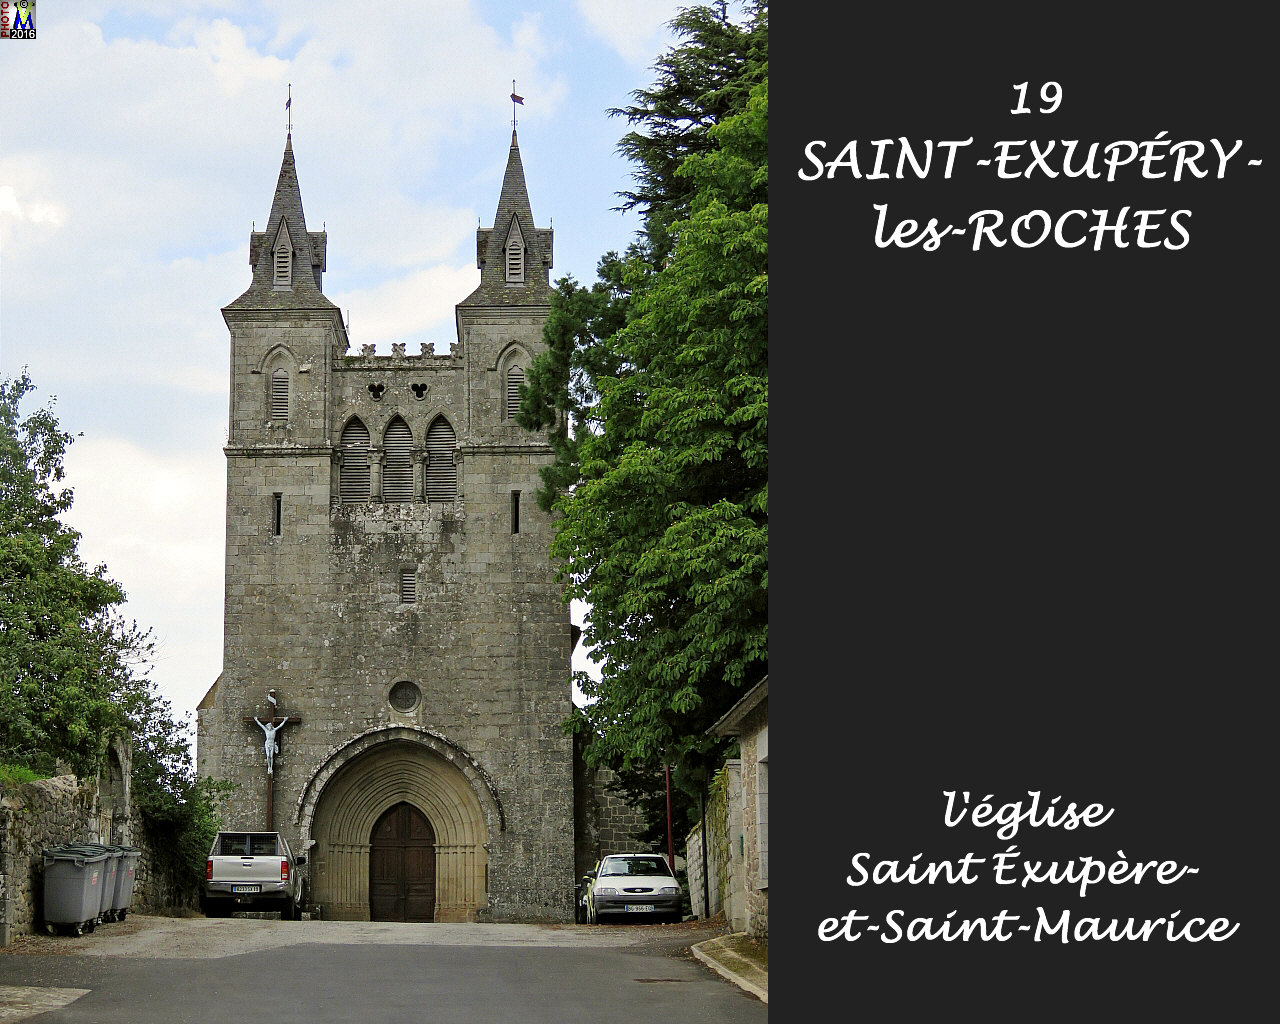 19ST-EXUPERY-ROCHES_eglise_100.jpg